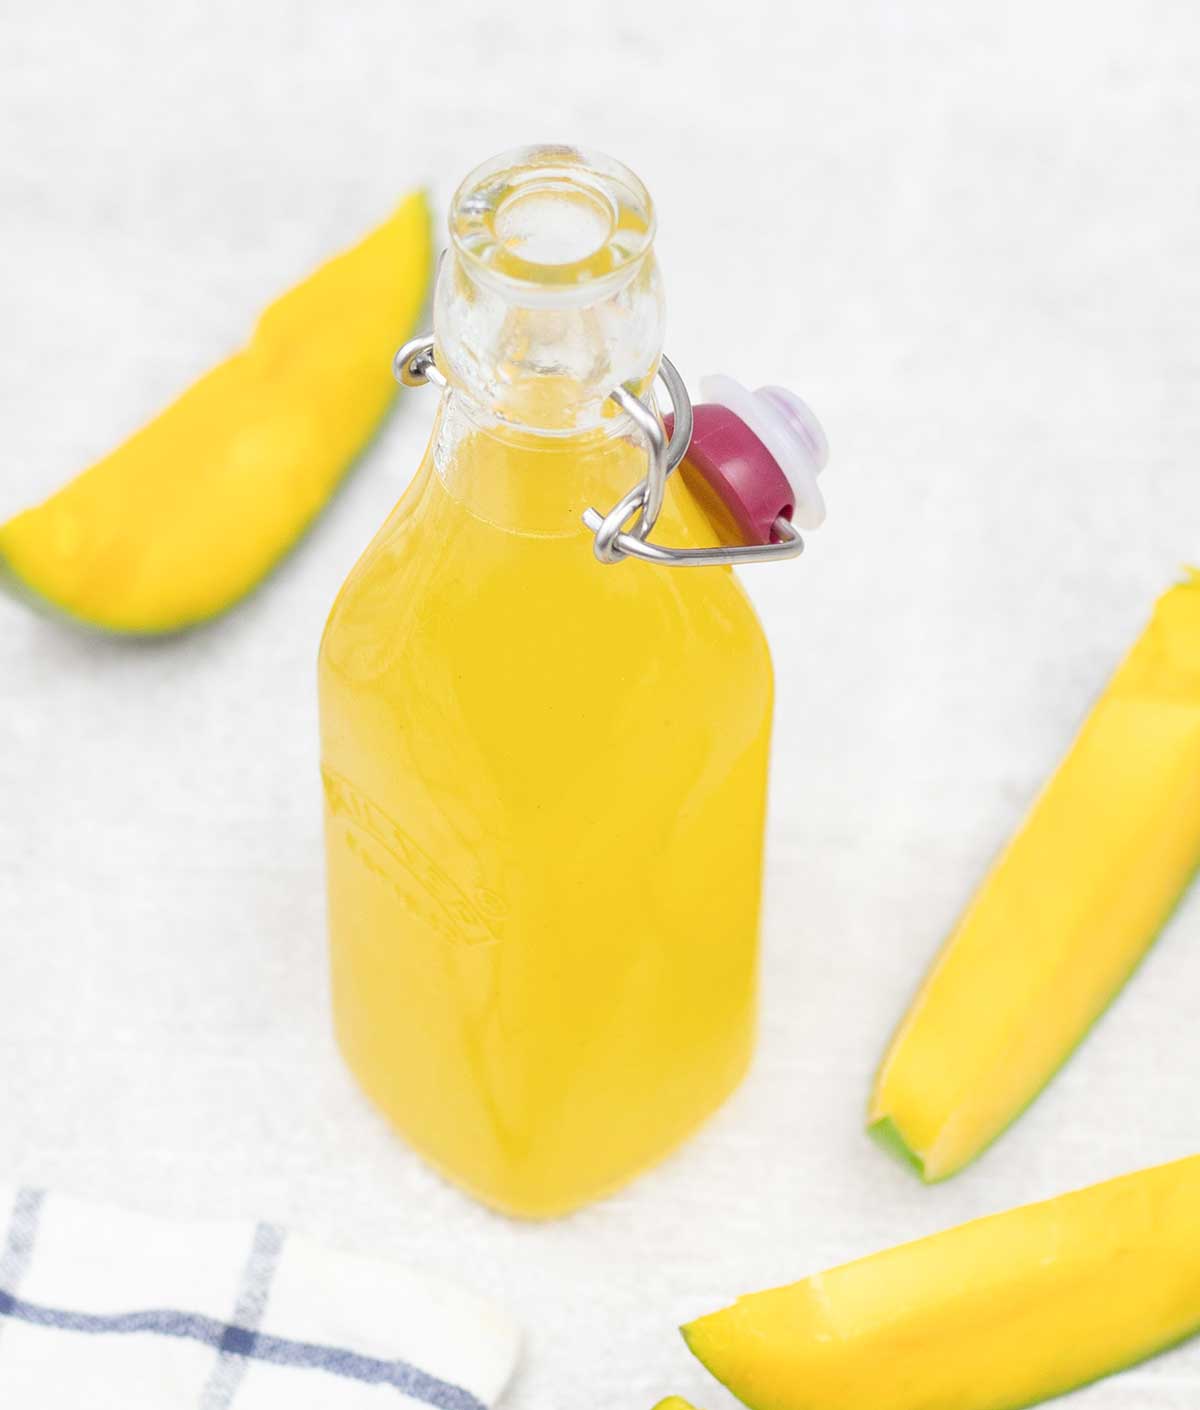 Mango syrup in a glass bottle and some mango slices around it.